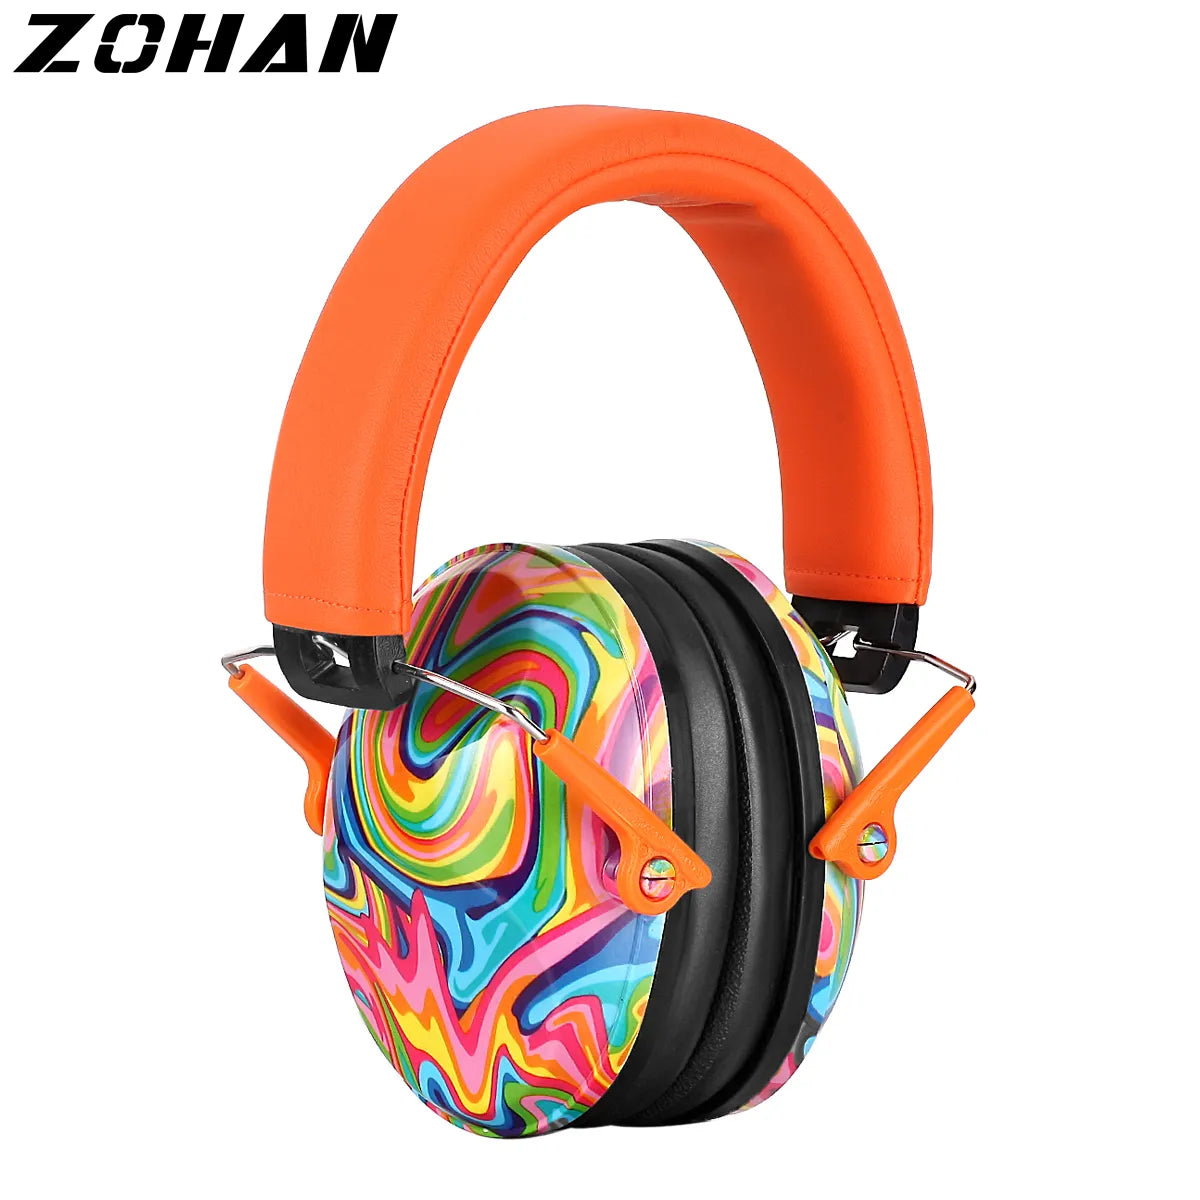 Noise Reduction Earmuffs for Safety, Adjustable Kid Ear Protection, Kid Ear Protection